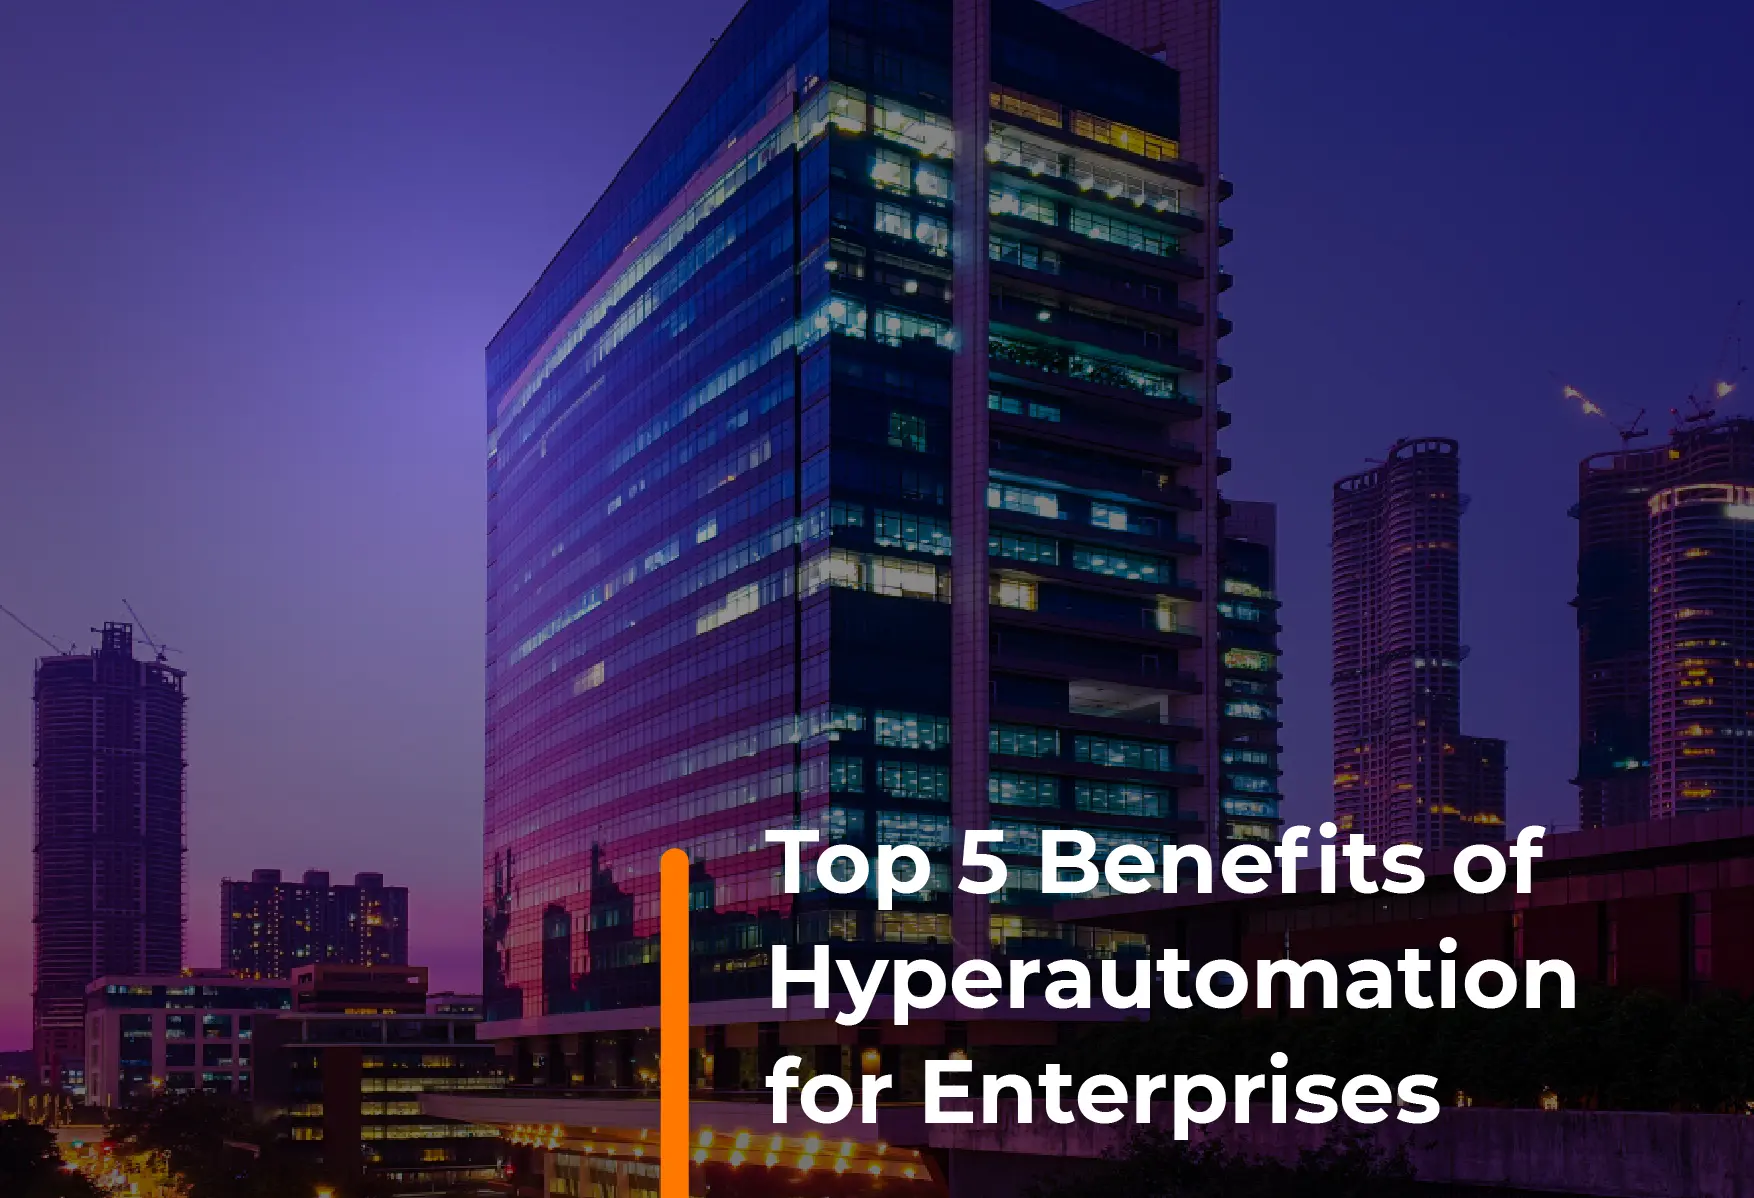 Top 5 Benefits of Hyperautomation for Enterprises